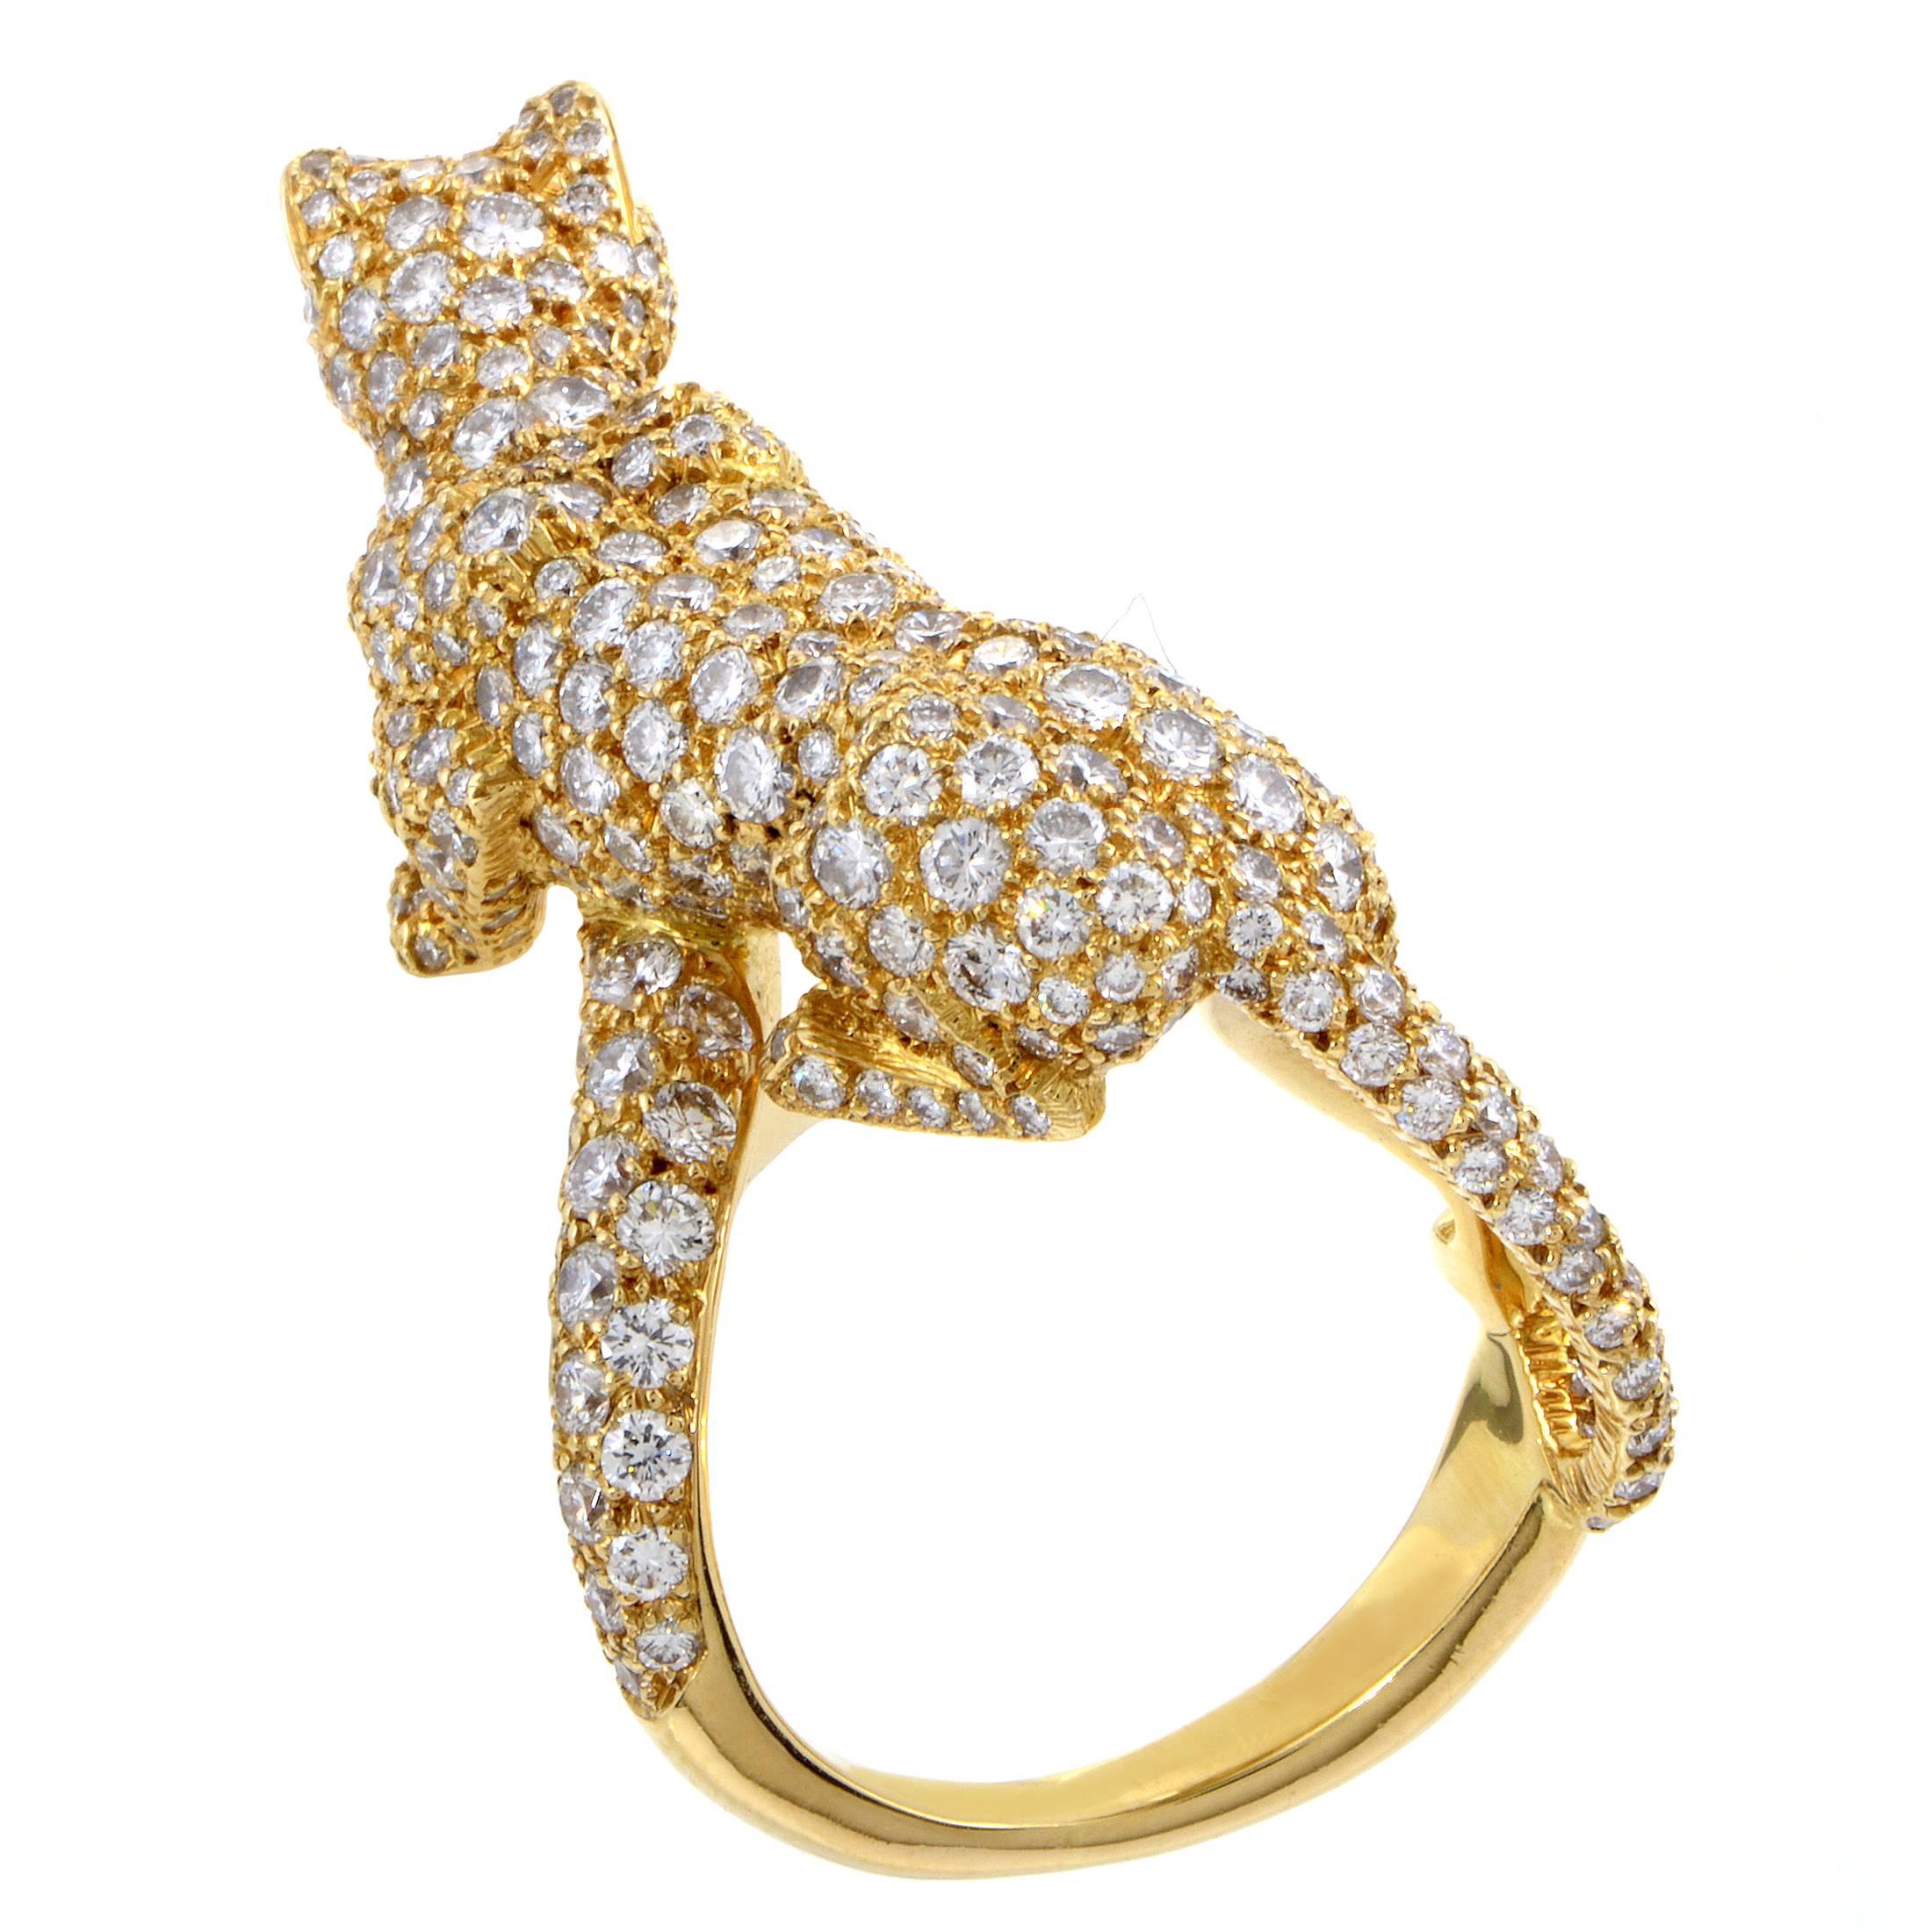 Presenting their highly regarded motif of a panther in glamorous style, Cartier created this fabulous ring where the majestic beast is crafted expertly from 18K yellow gold and embellished with F-color diamonds of VVS clarity totaling 3.30 carats as